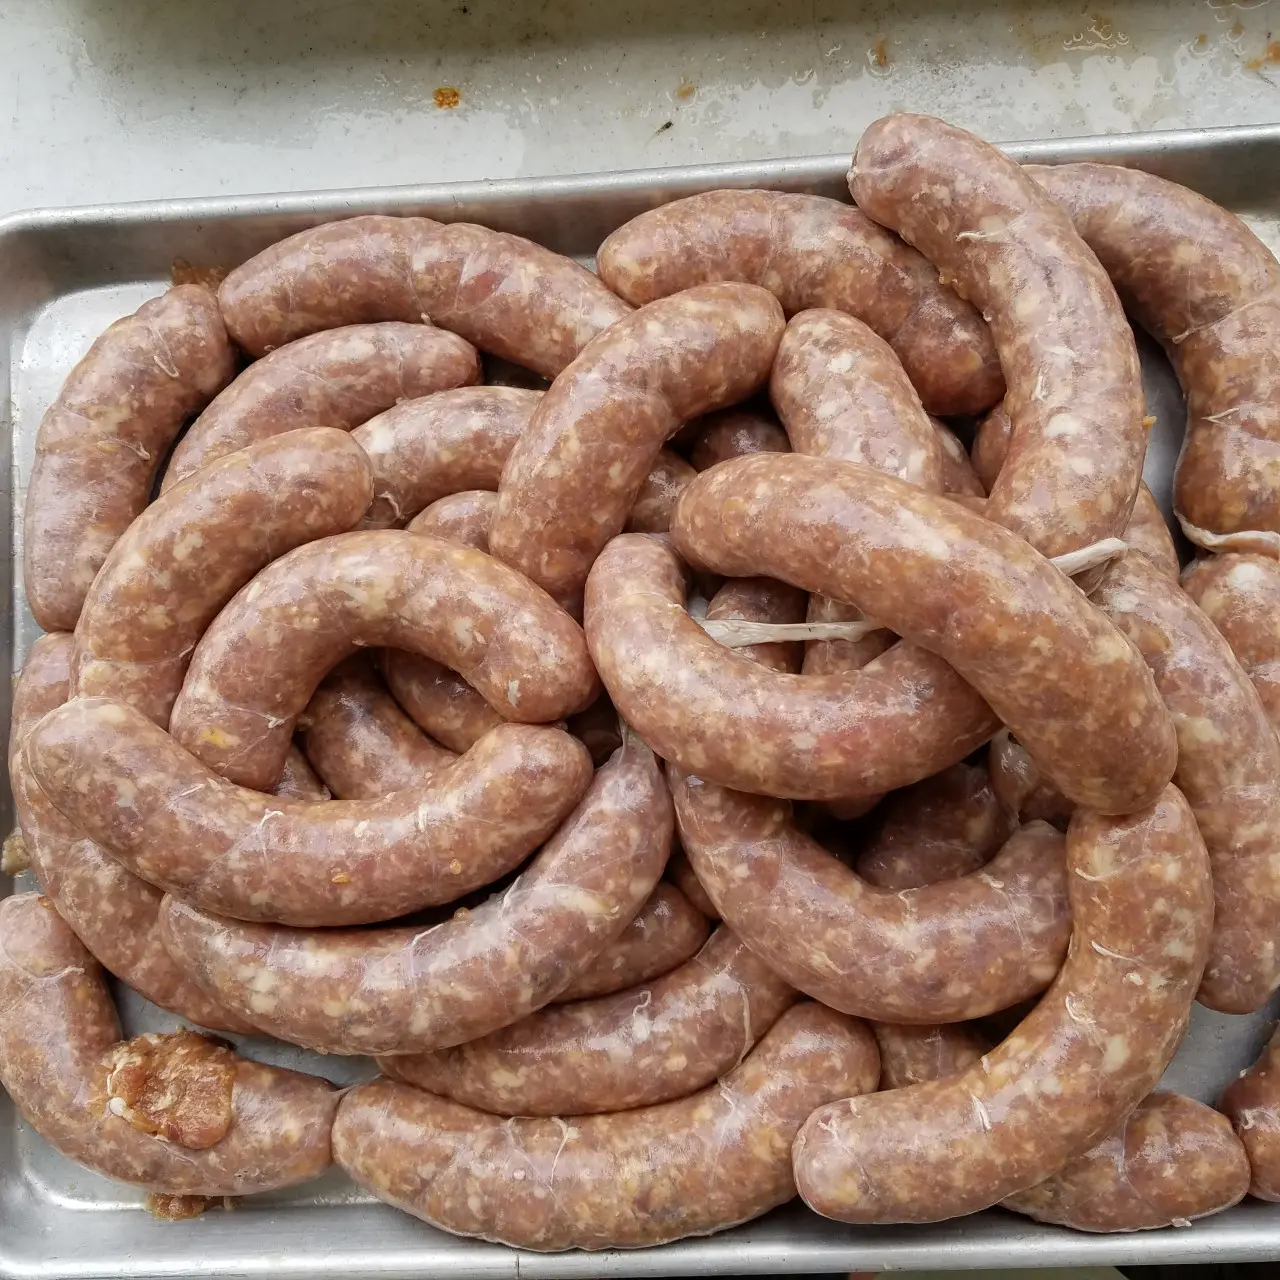 smoked deer sausage recipe - What is the best way to cook smoked deer sausage